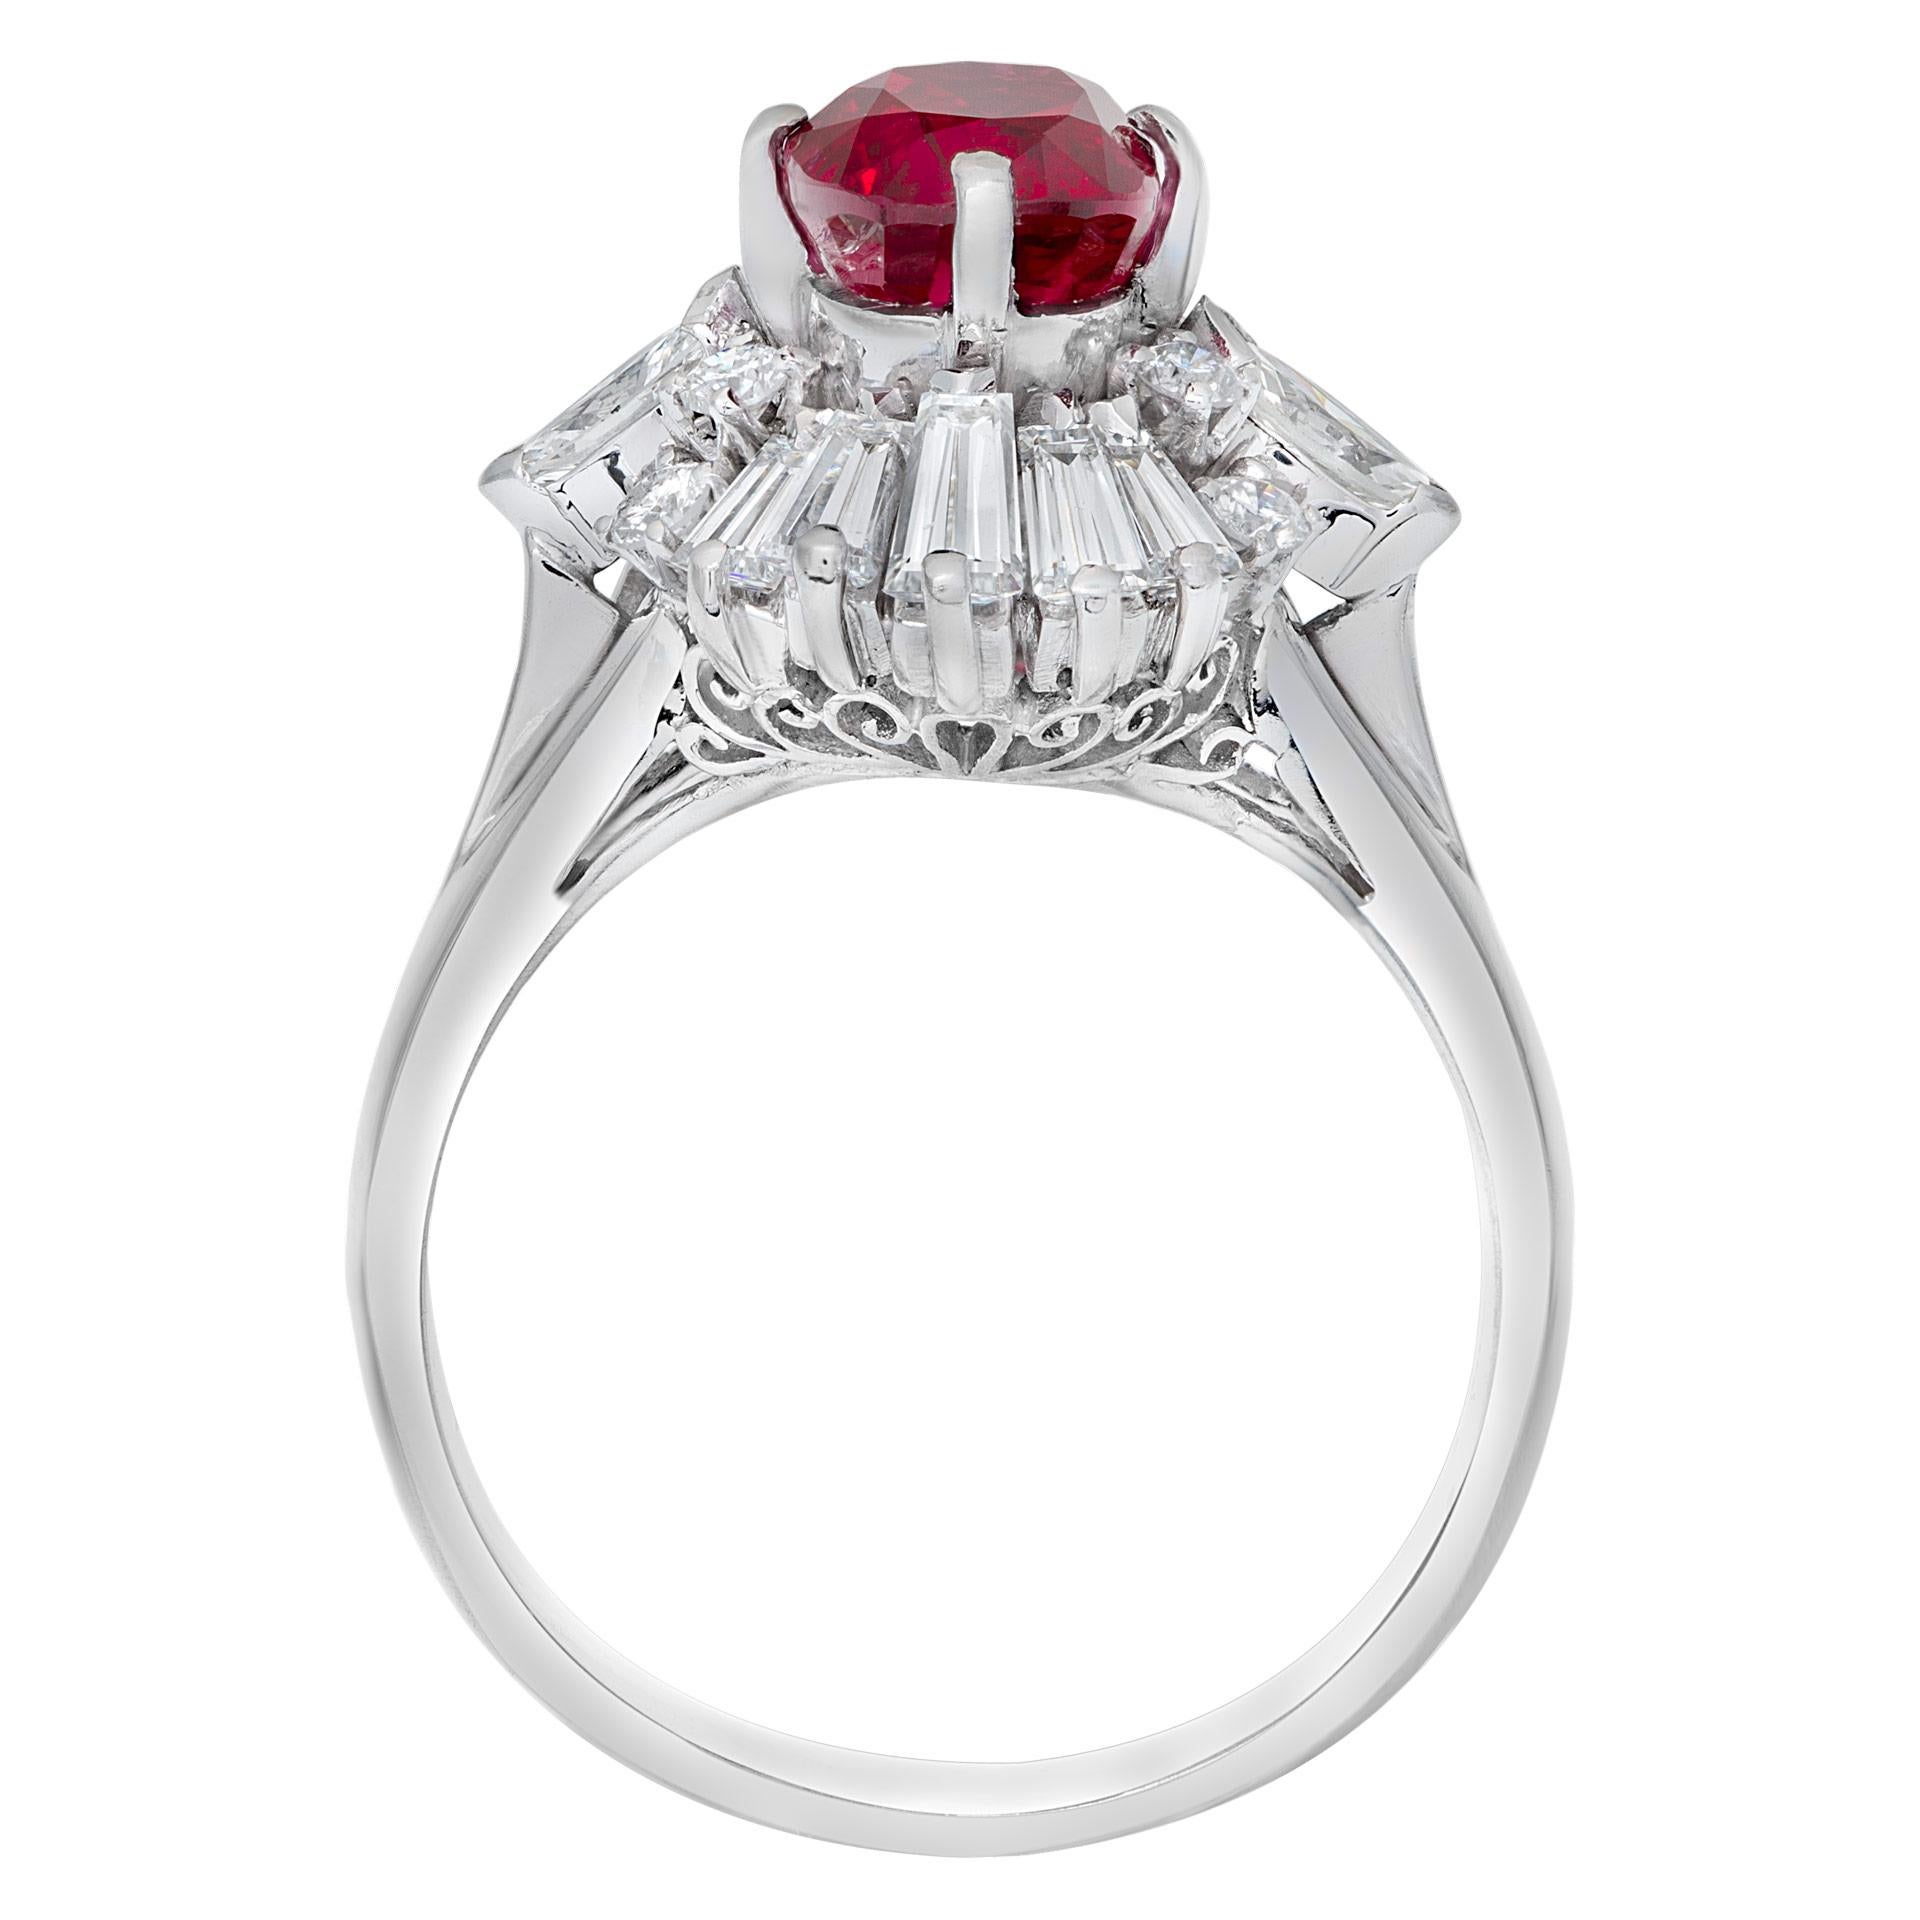 AGL Certified Oval 1.81 Carat Center Ruby Ring in Platinum In Excellent Condition For Sale In Surfside, FL